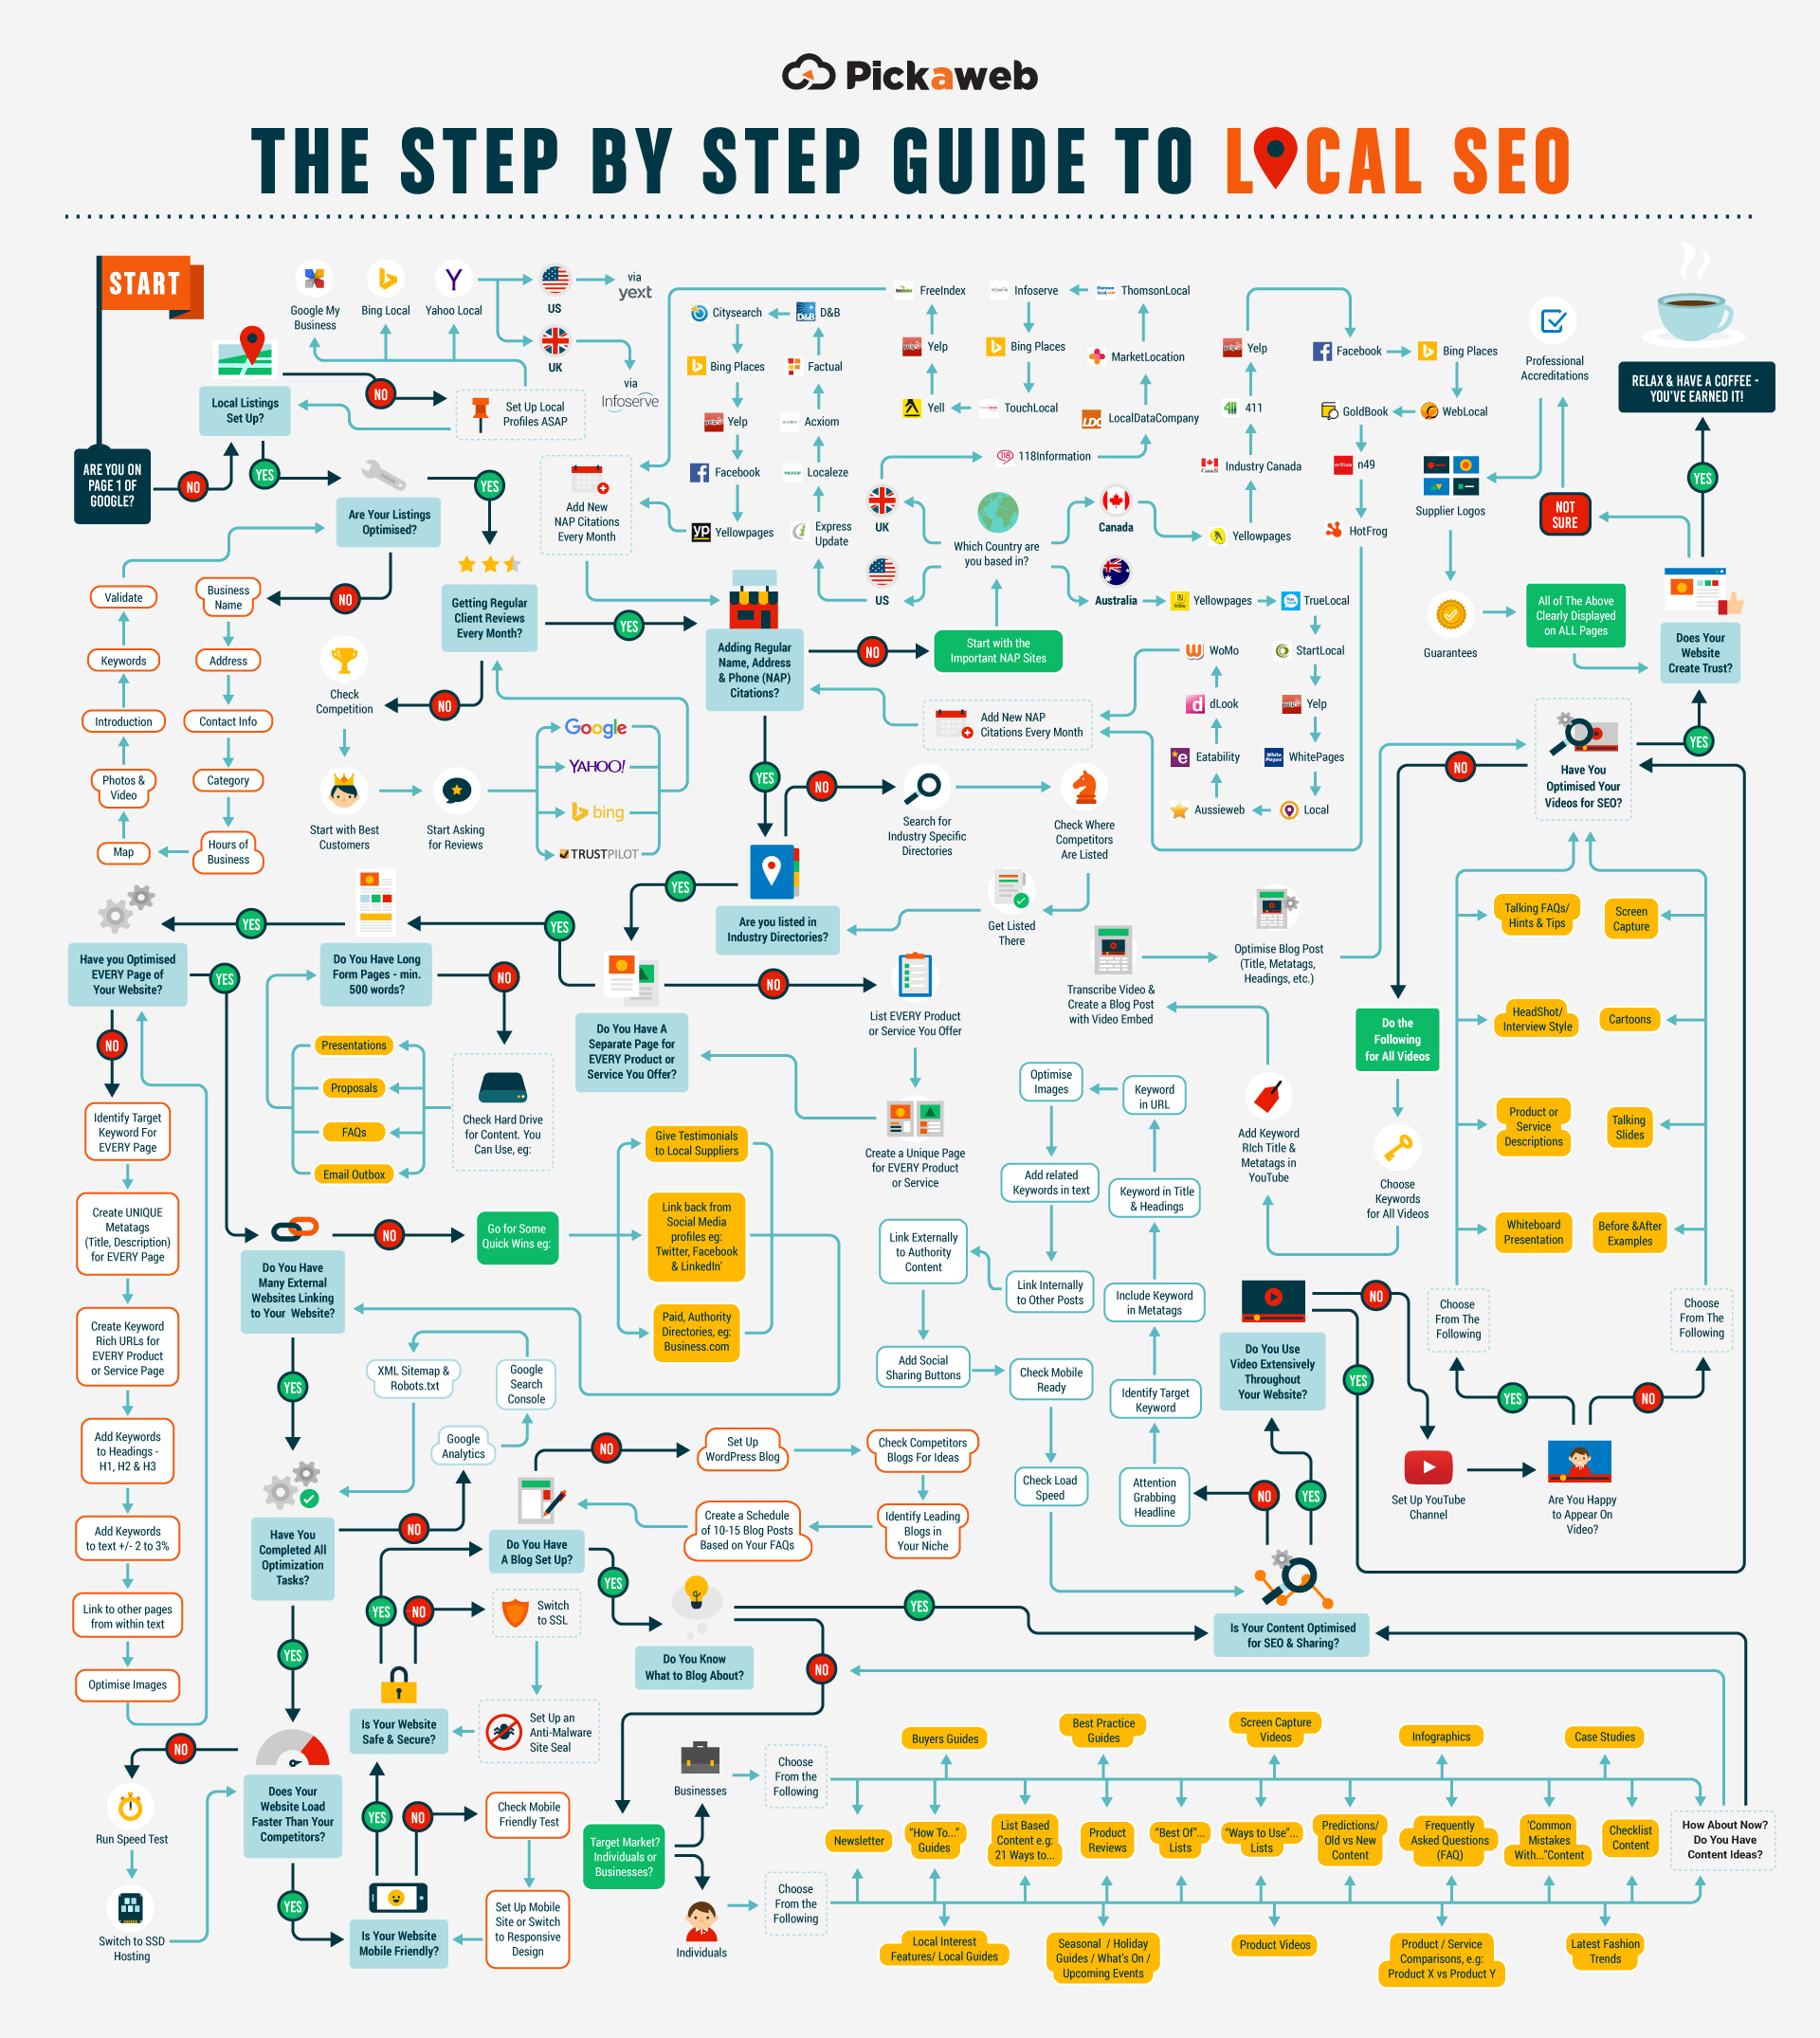 Local SEO Roundup – Experts Share Their Favourite Local SEO Tips - An Infographic from Pickaweb